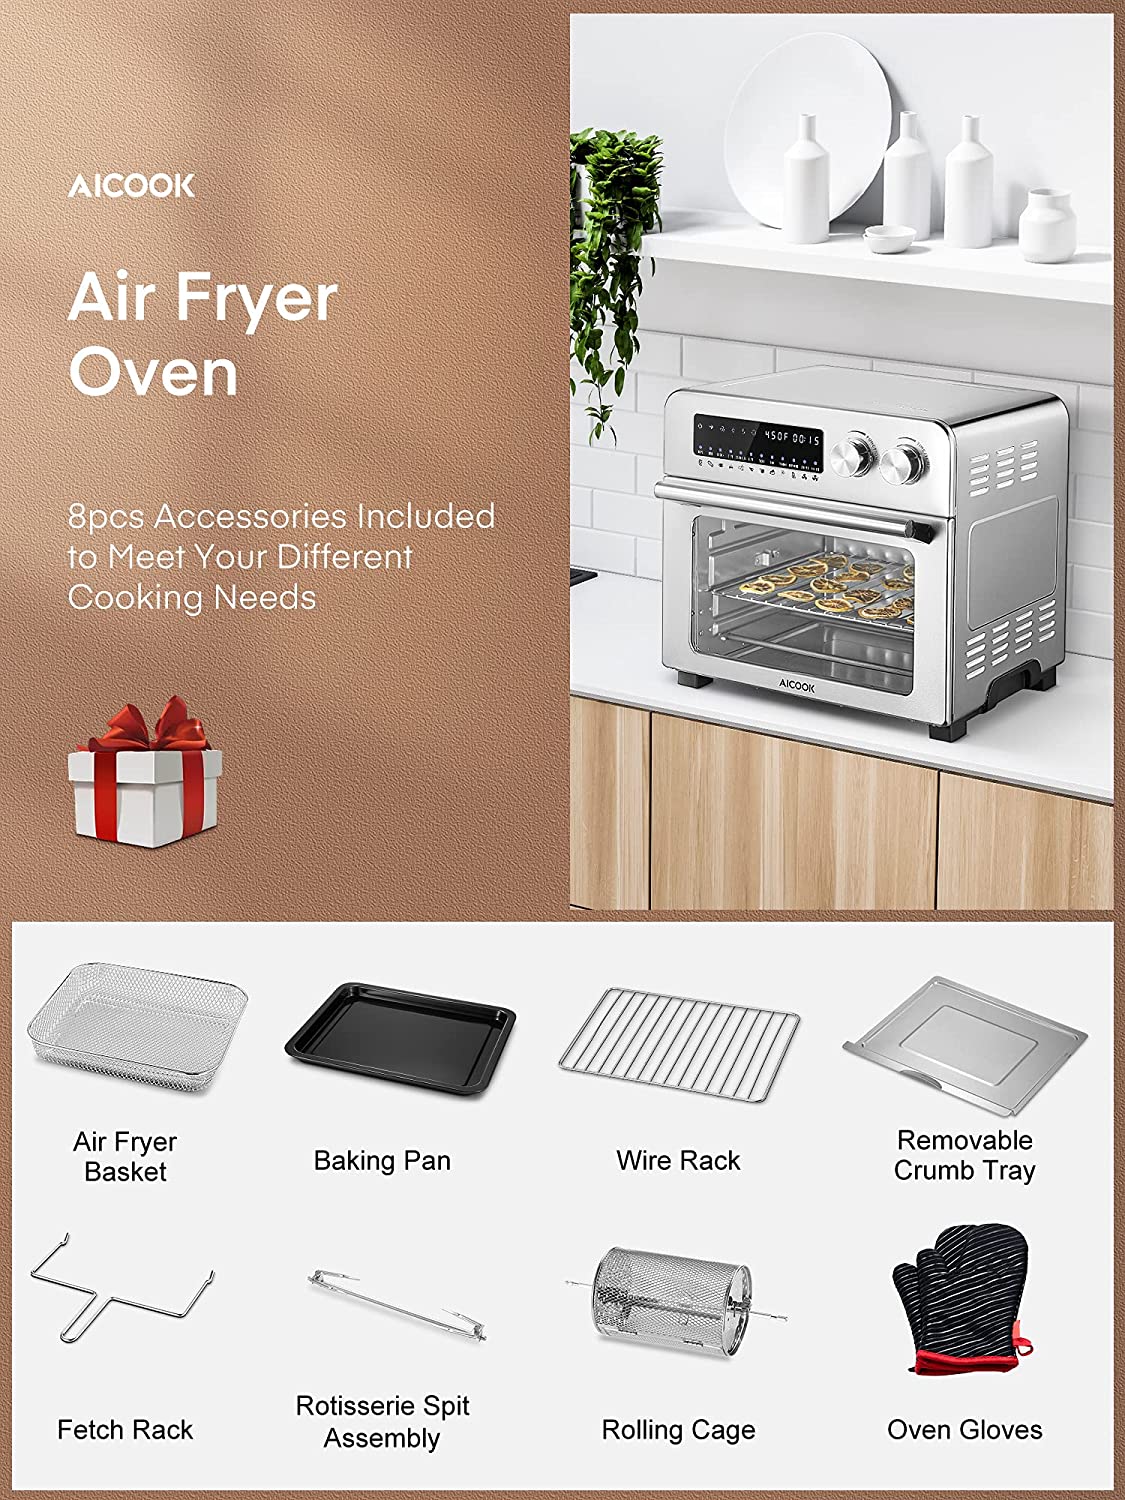 AICOOK Air Fryer Oven 24 QT, 12-in-1 Air Fryer 1700W Digital Large Convection Oven with Rotisserie and Dehydrator for Chicken, French Fries and Pizza, Air fryer Toaster Oven Include 8 Accessories, Good Gift